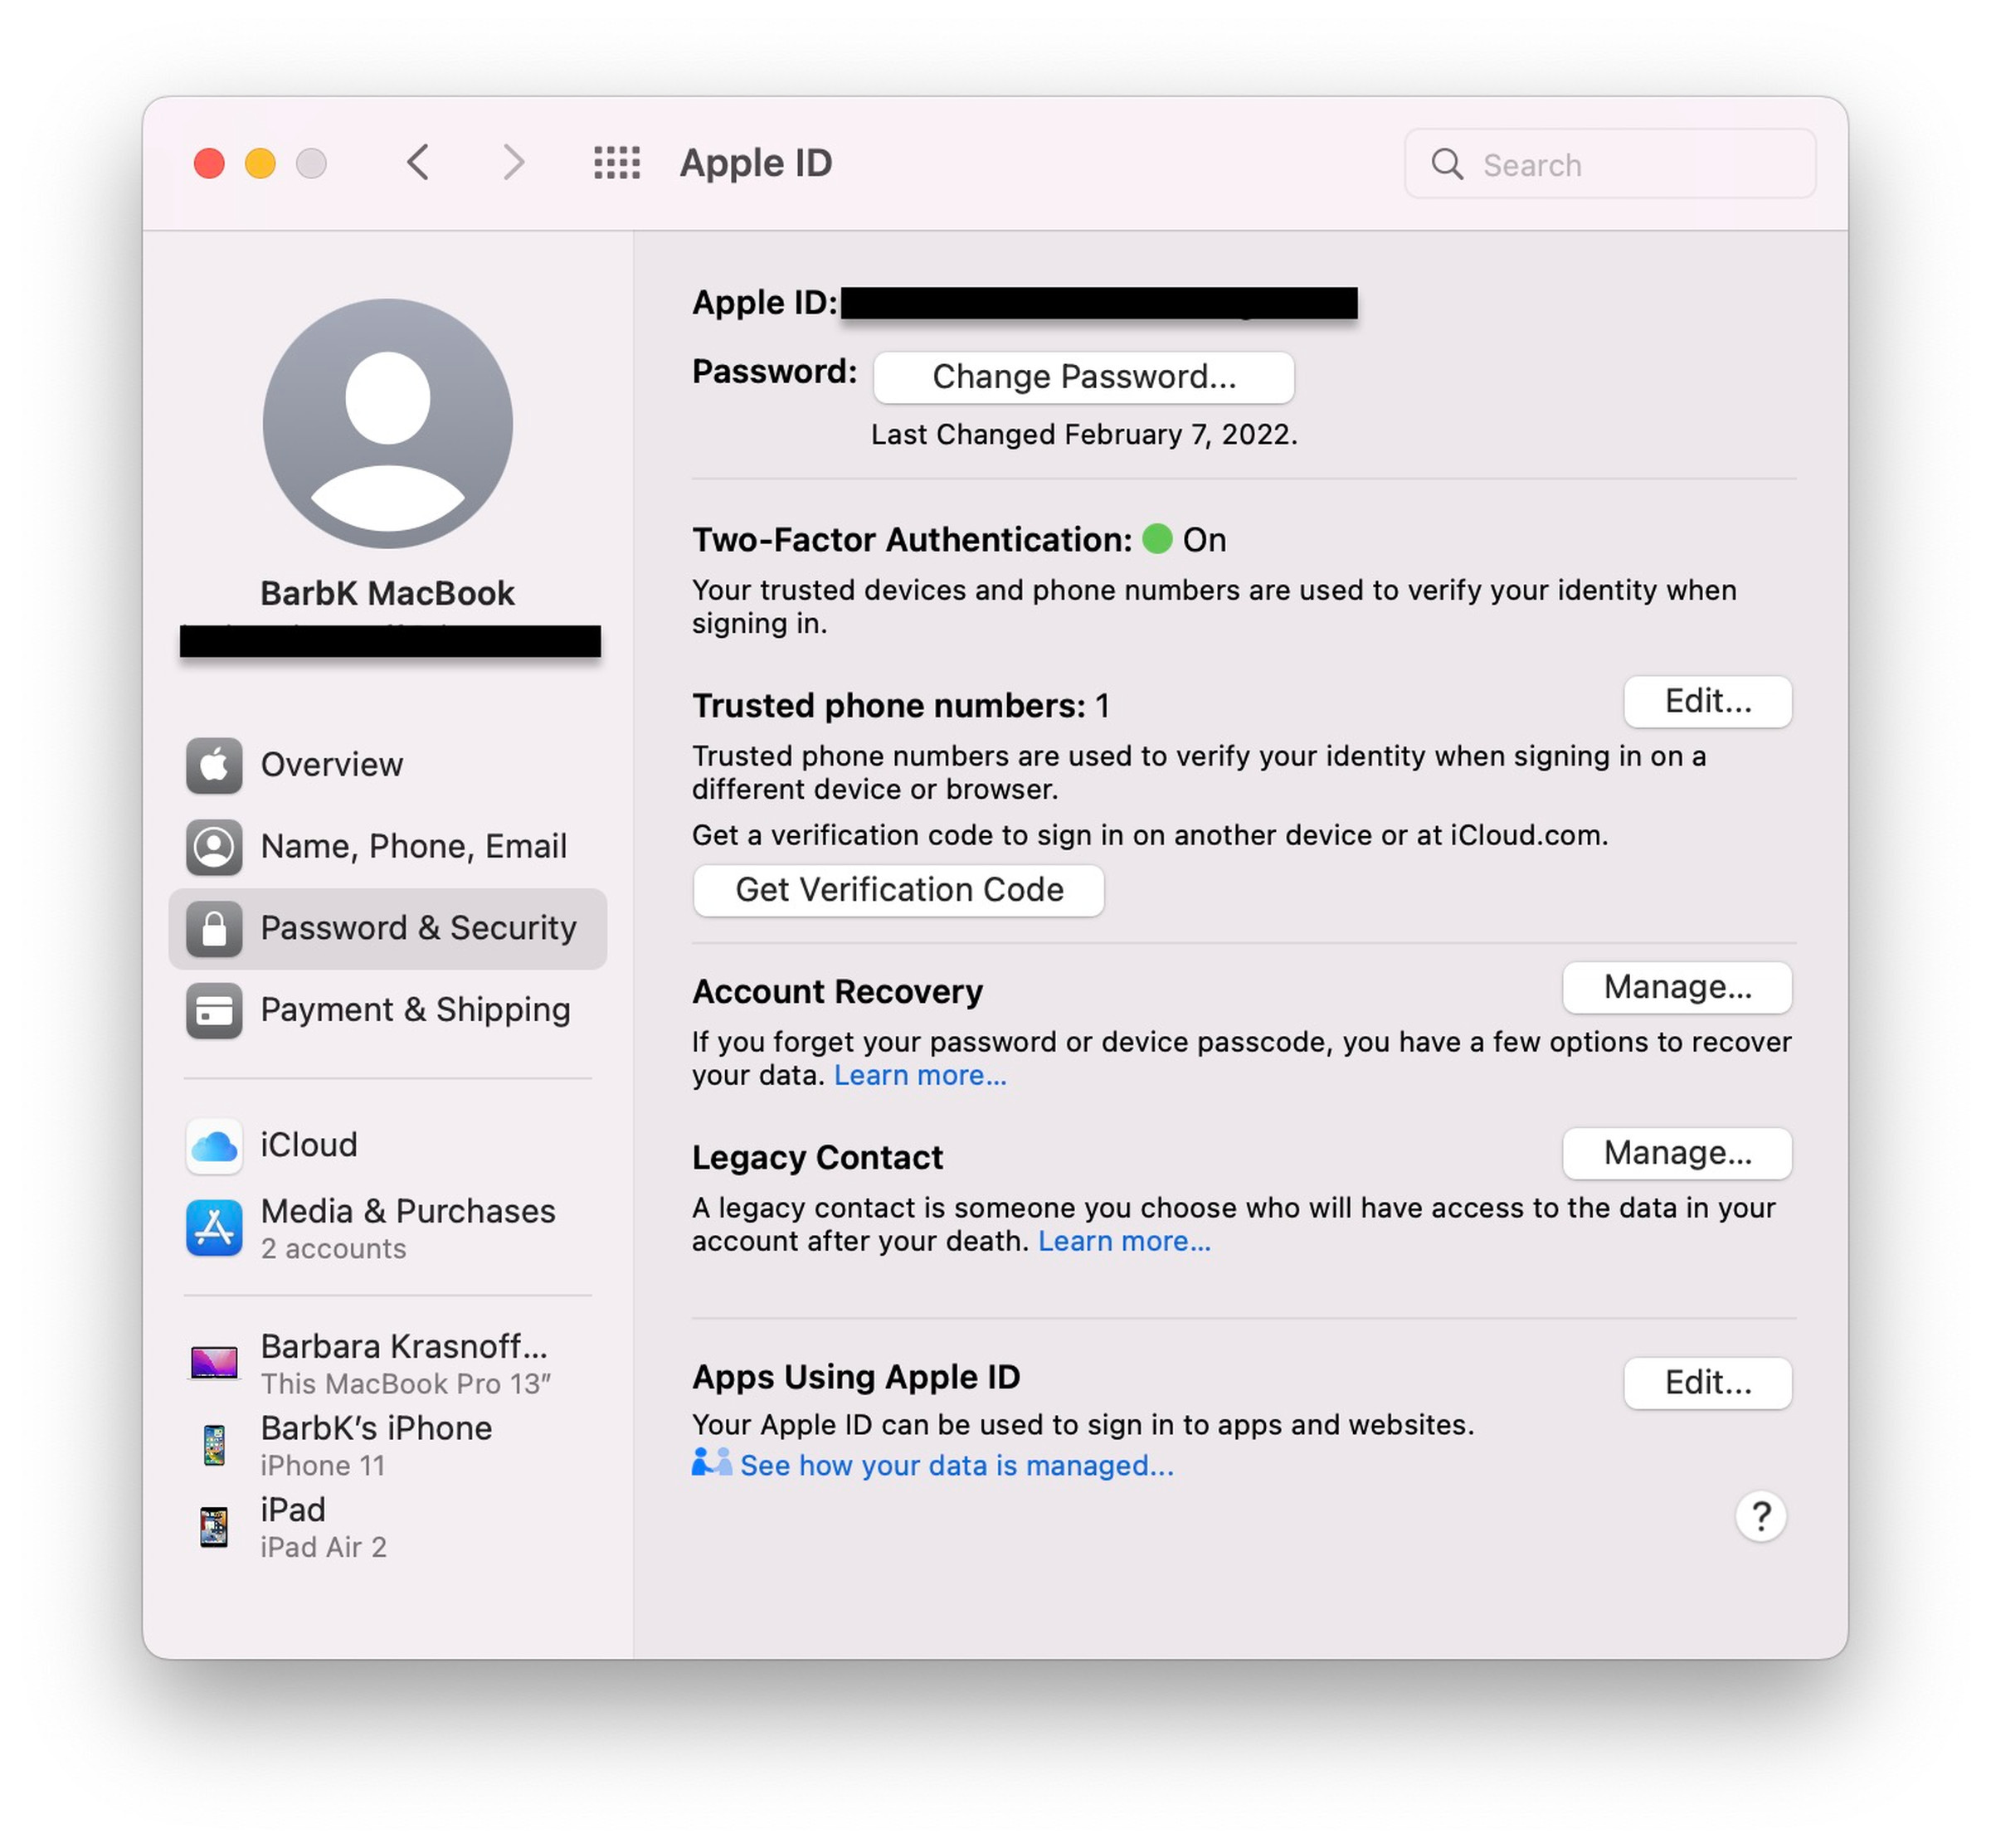 Apple ID security page with options to change passwords, select trusted phone numbers, and others.